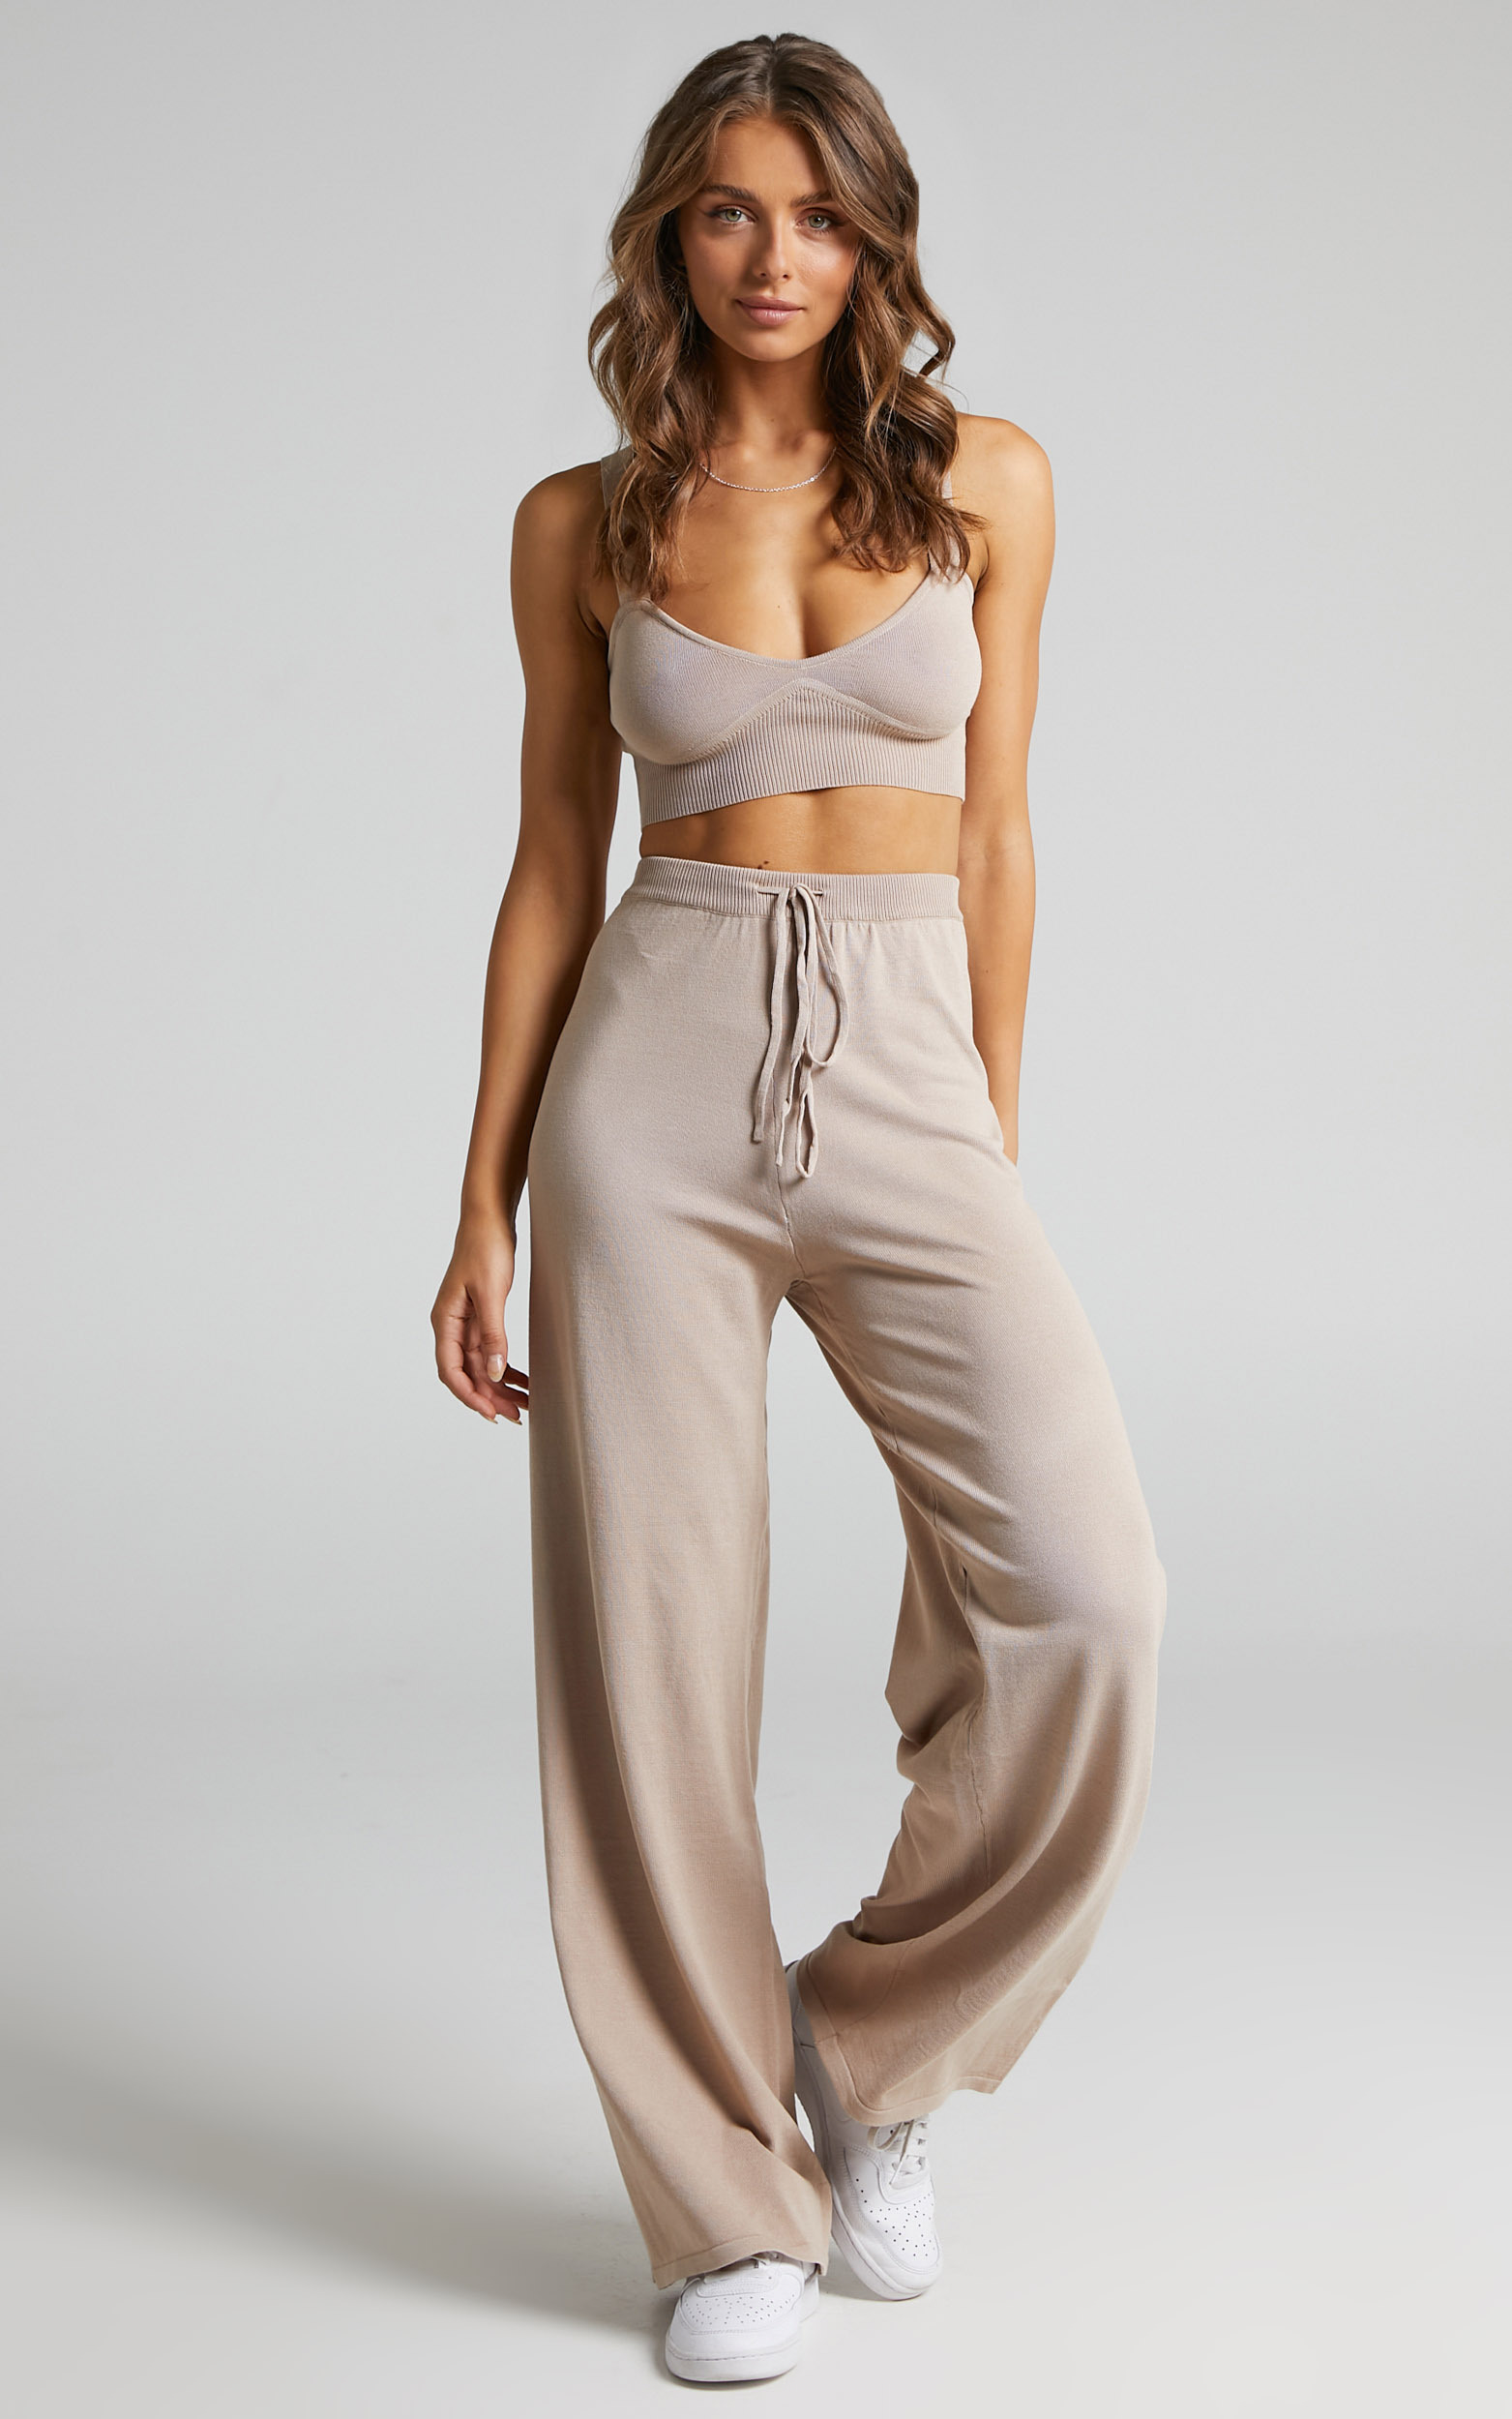 Chonnie Knit Bralette Top and Wide Leg Pants Two Piece Set in Mocha - 06, BRN1, hi-res image number null